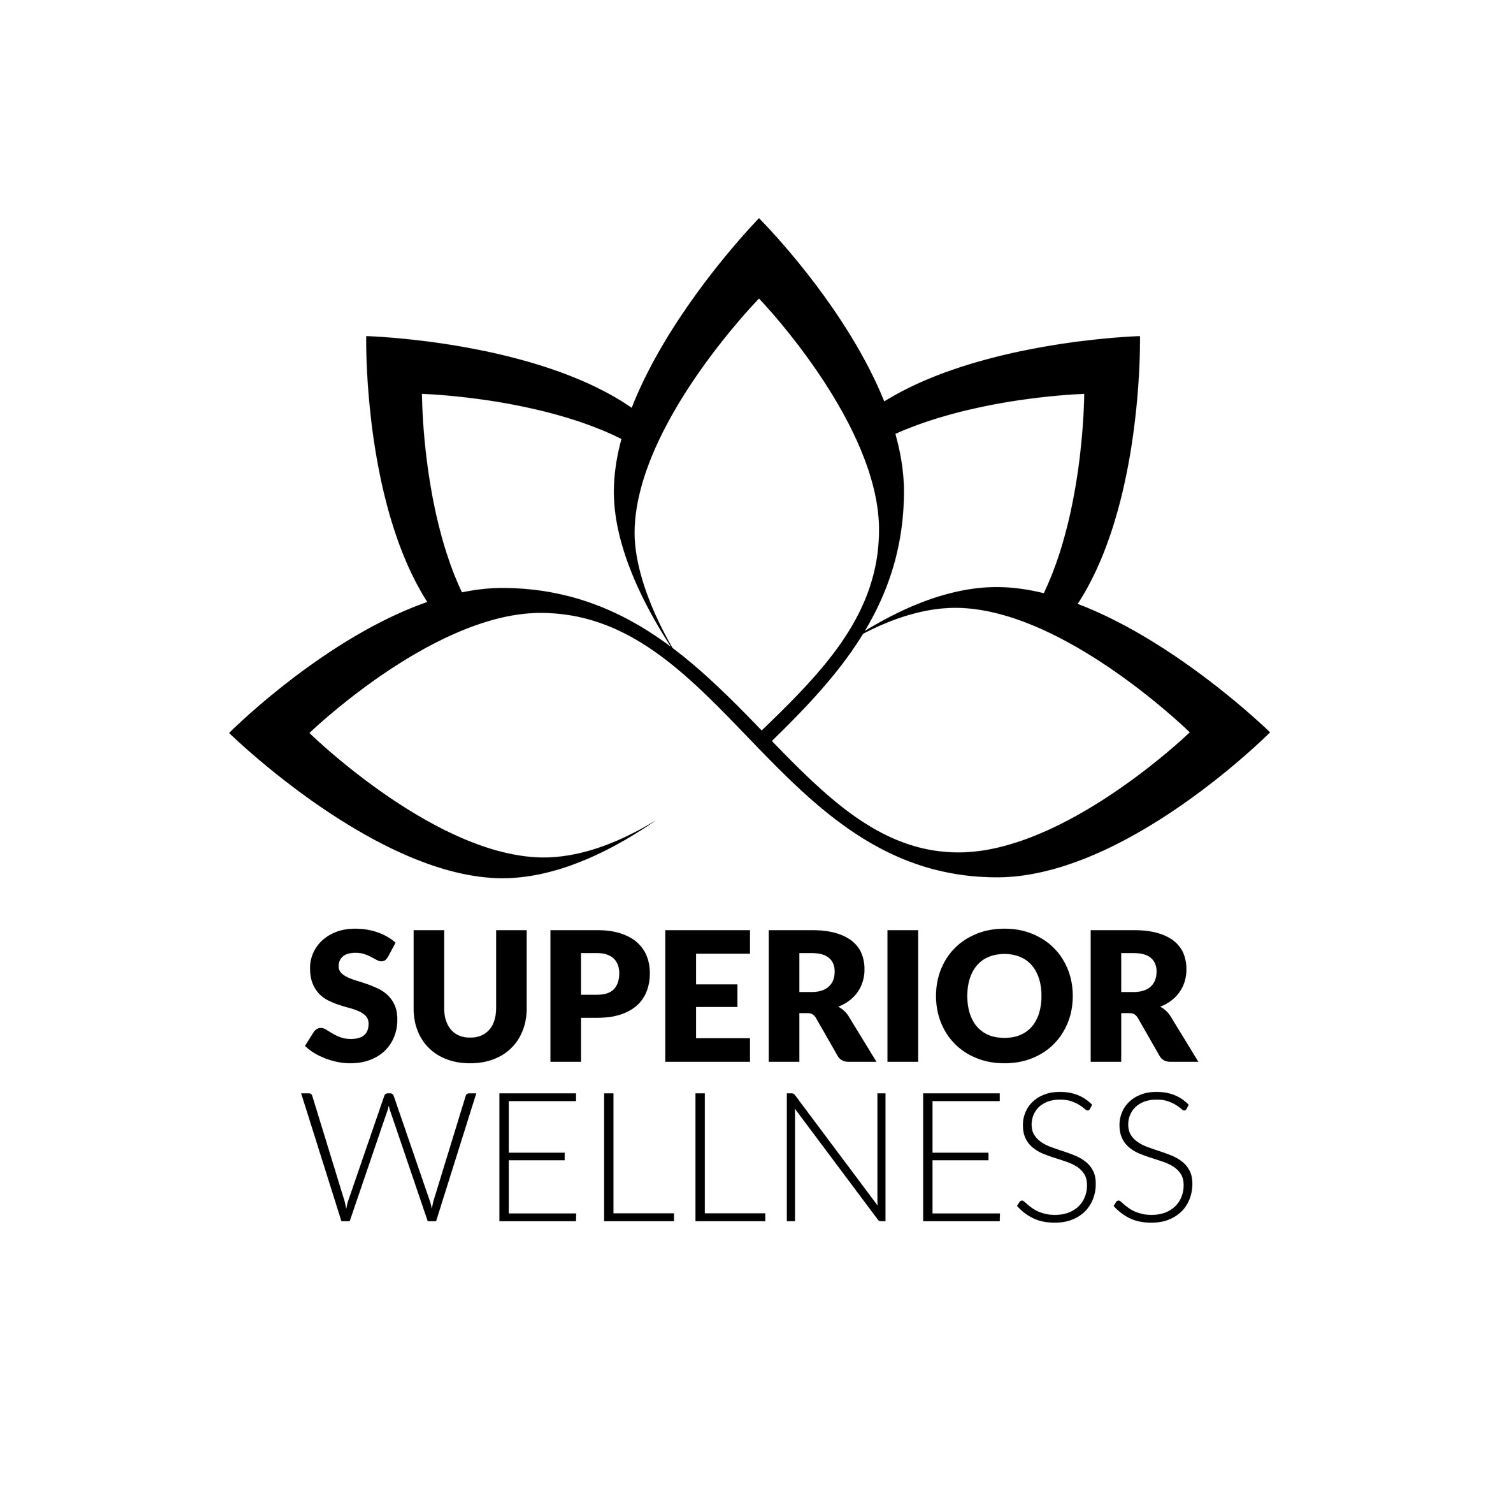 Superior Wellness is proud to announce the official launch of two brand new ranges - Hekla Saunas and Chill Tubs.